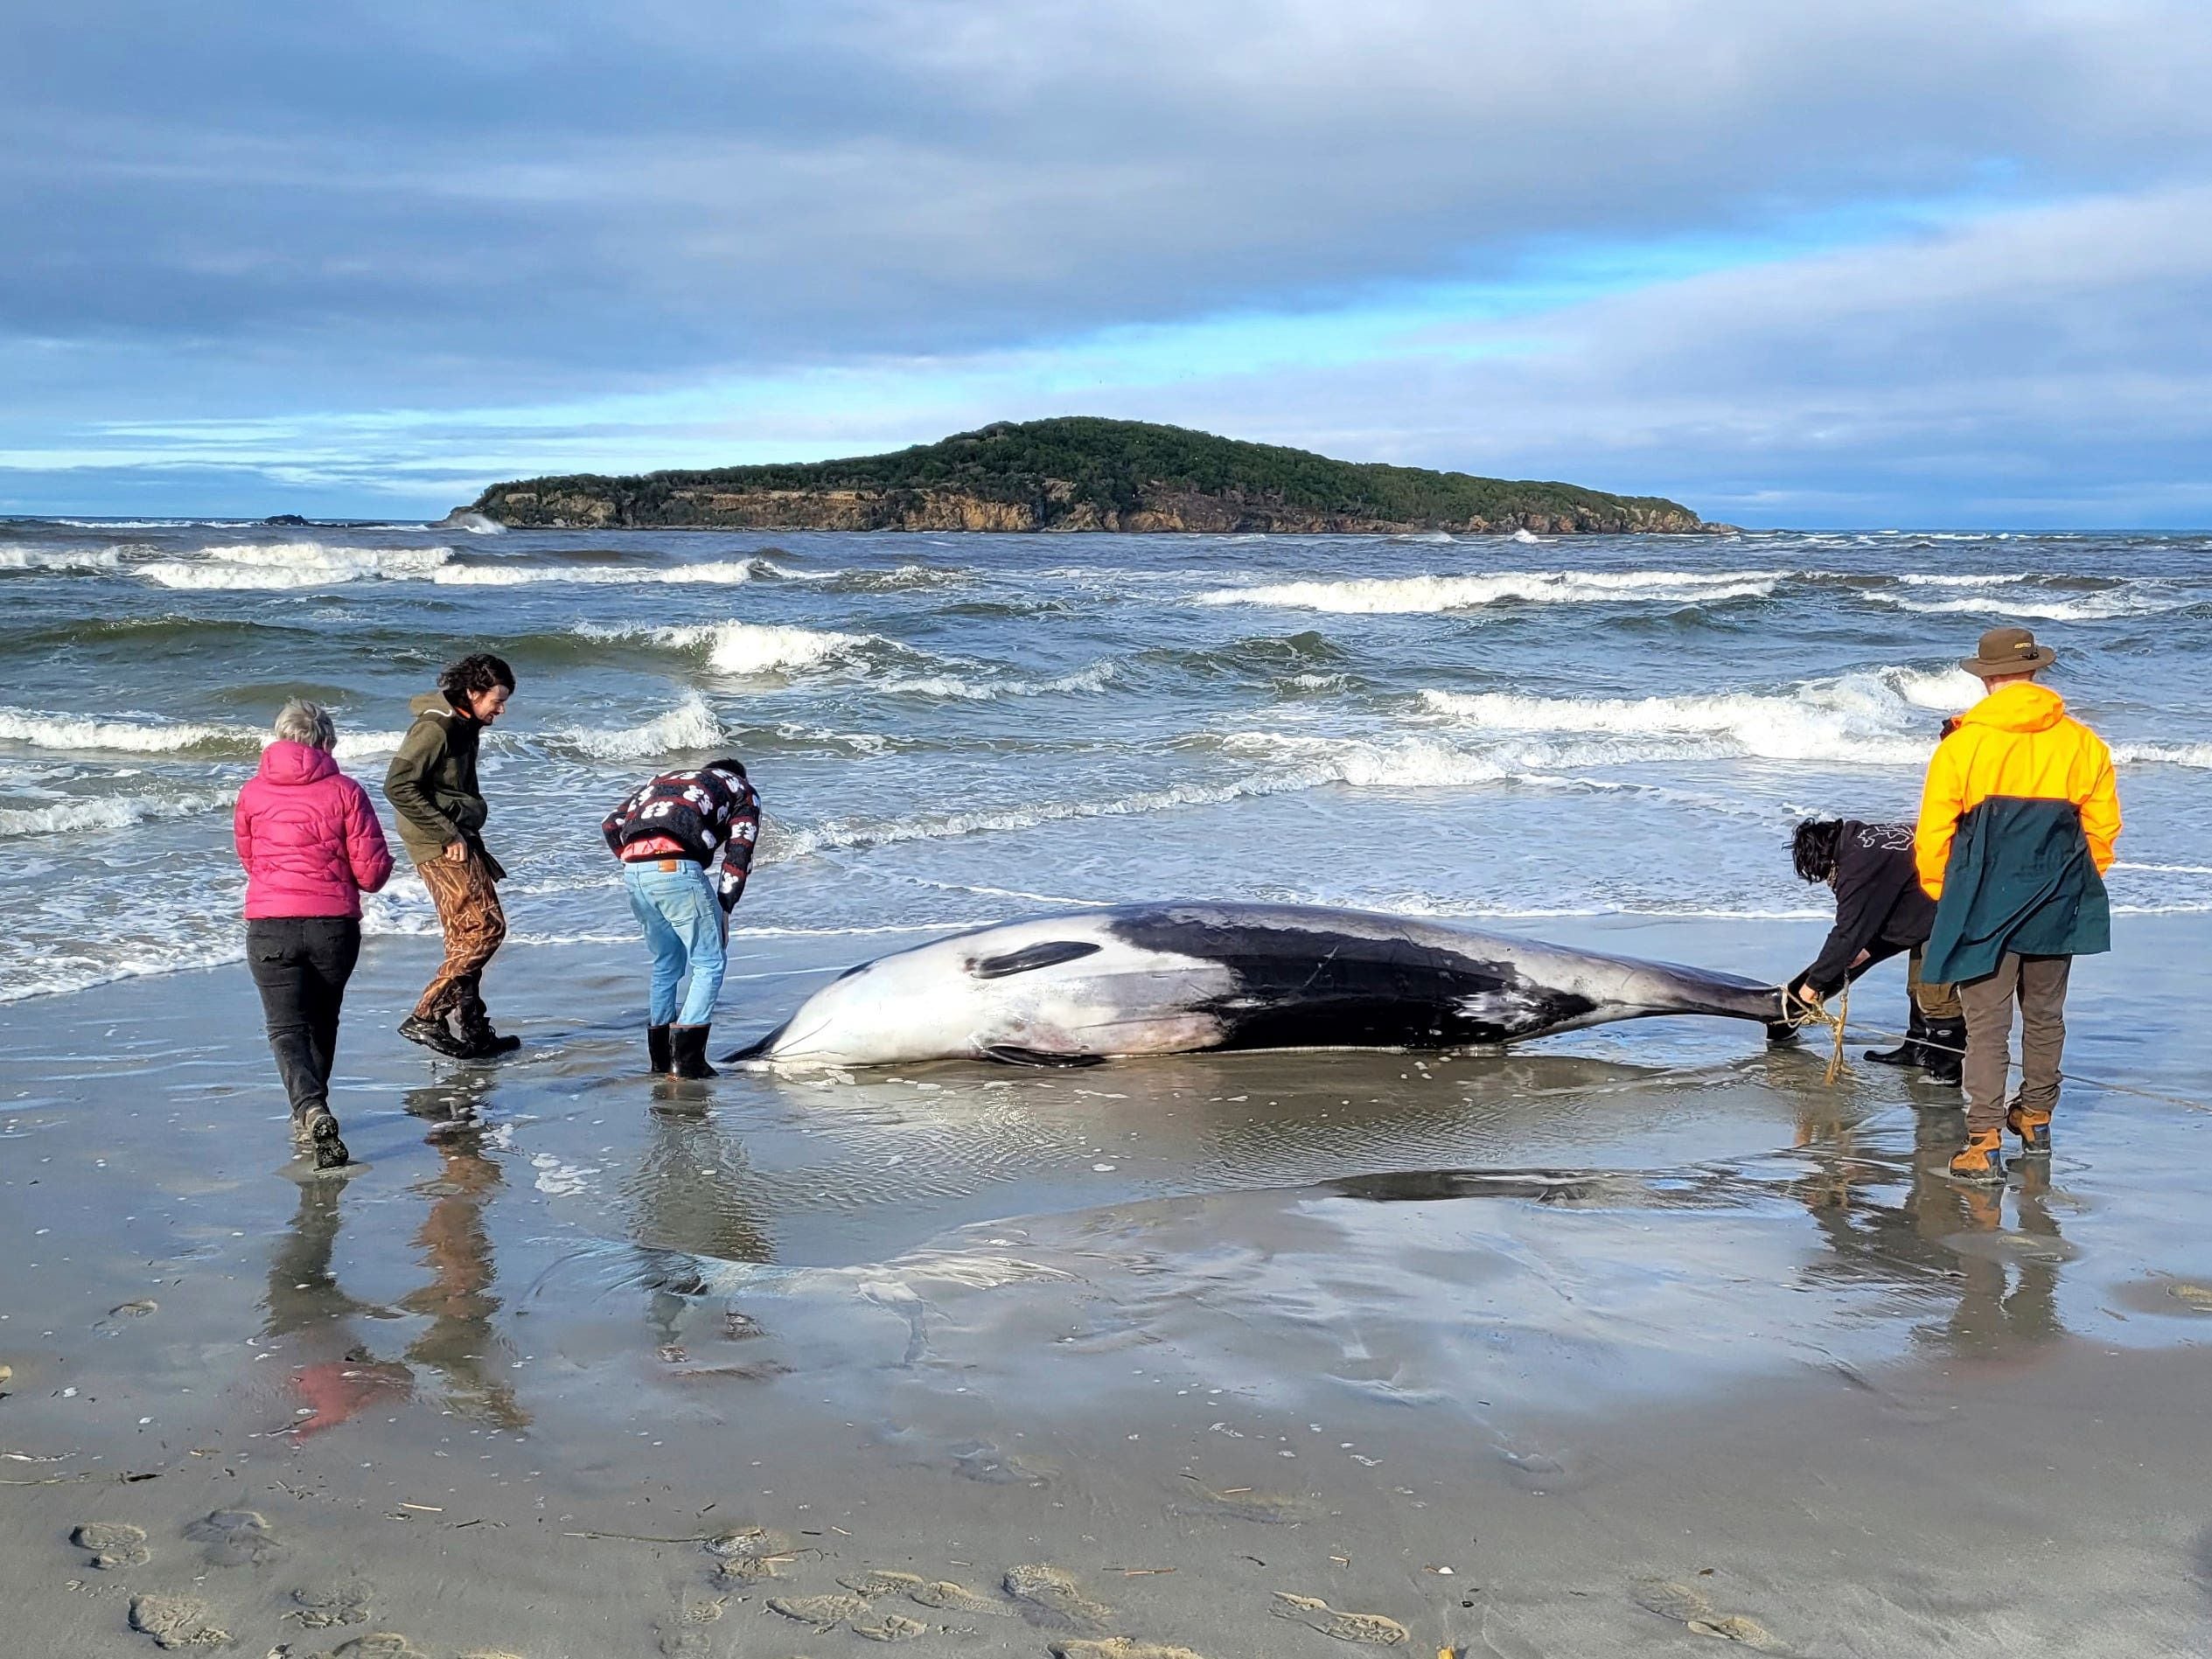 Rare whale found on beach could provide wealth of data for experts